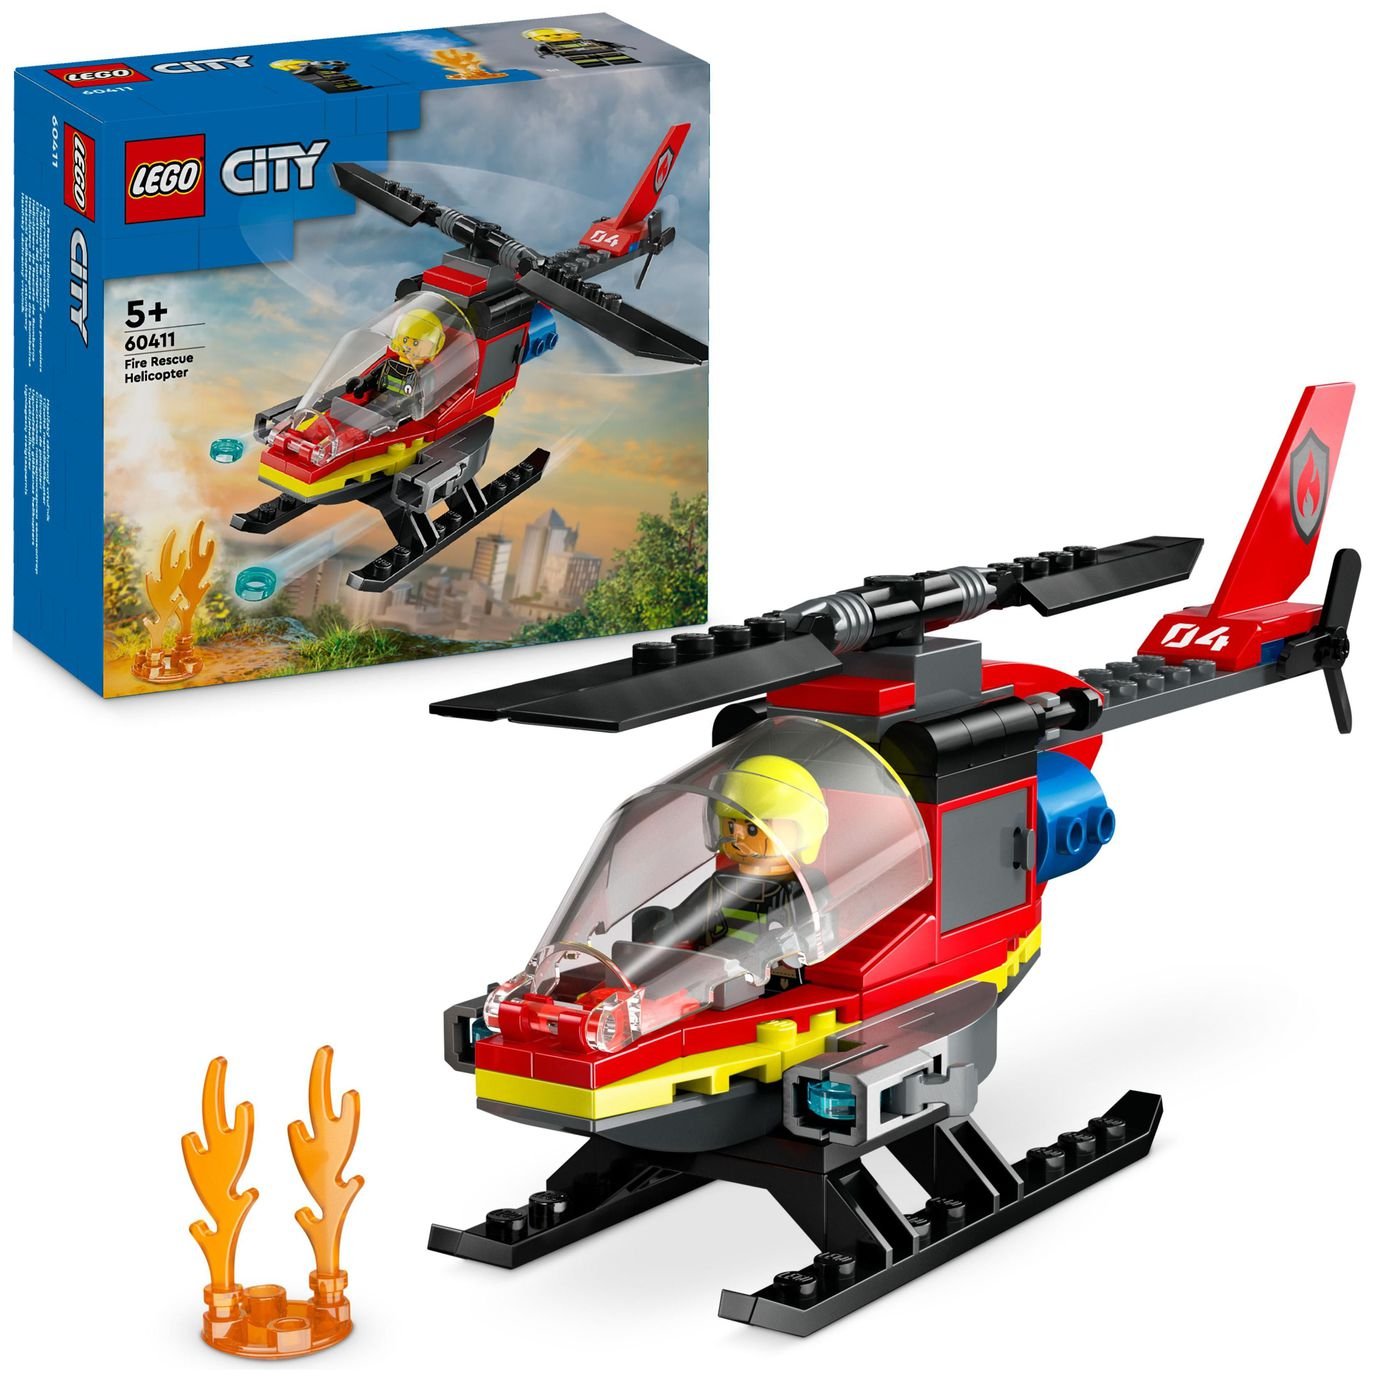 LEGO City Fire Rescue Helicopter Toy Vehicle Set 60411